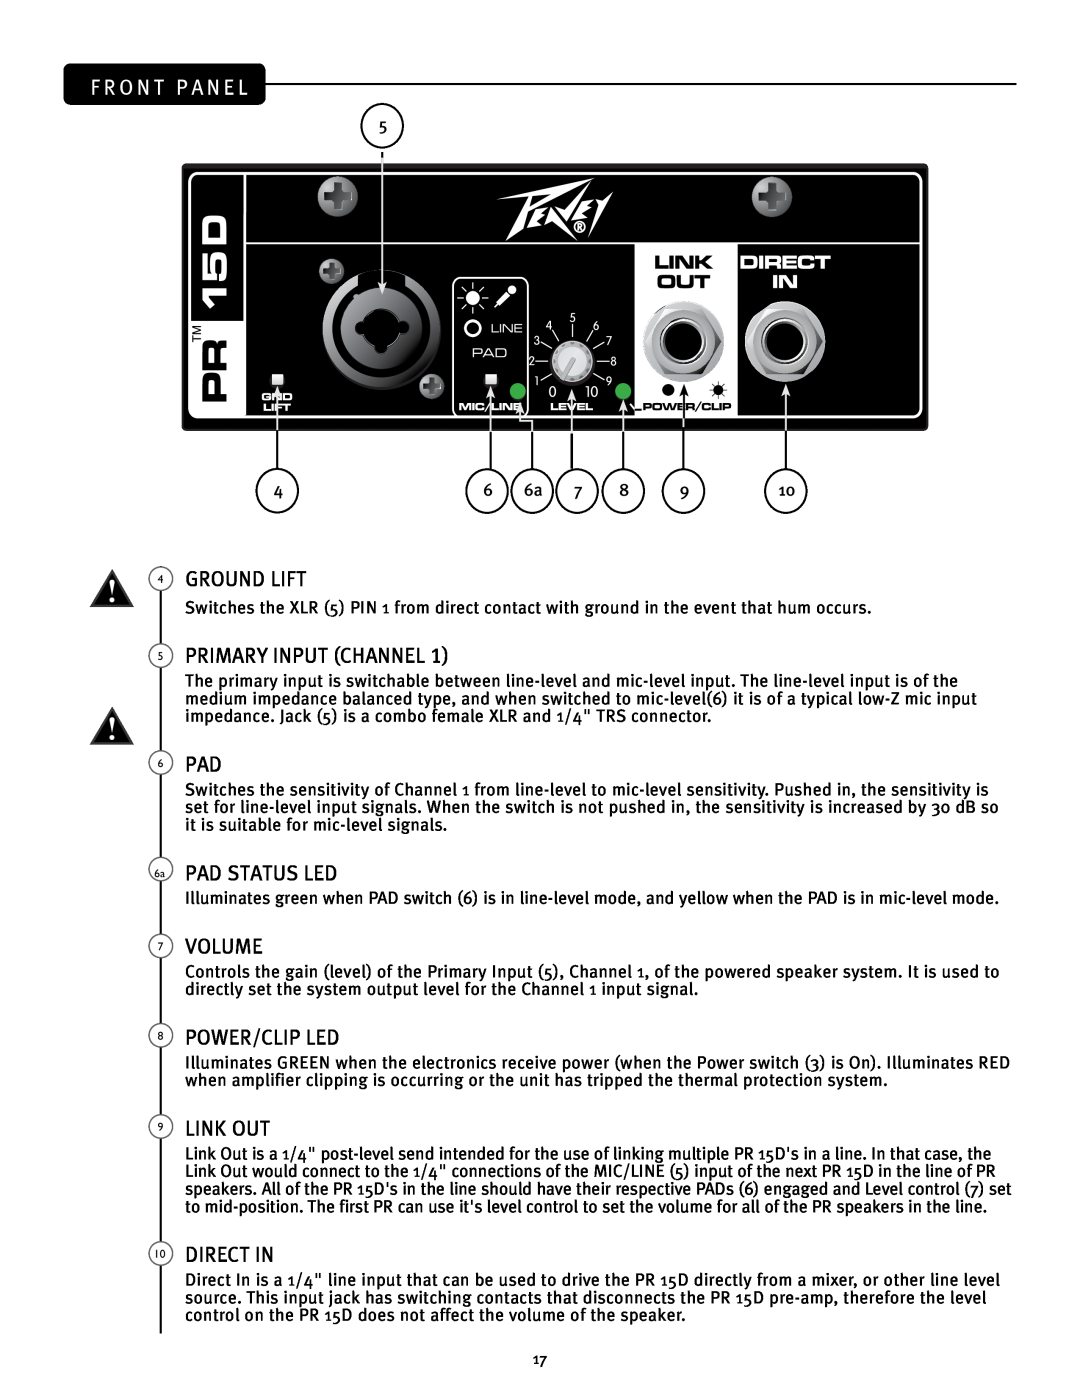 Peavey PR 15 D manual F R O N T P A N E L, 4GROUND LIFT, 5PRIMARY INPUT CHANNEL, Pad Status Led, Volume, 8POWER/CLIP LED 